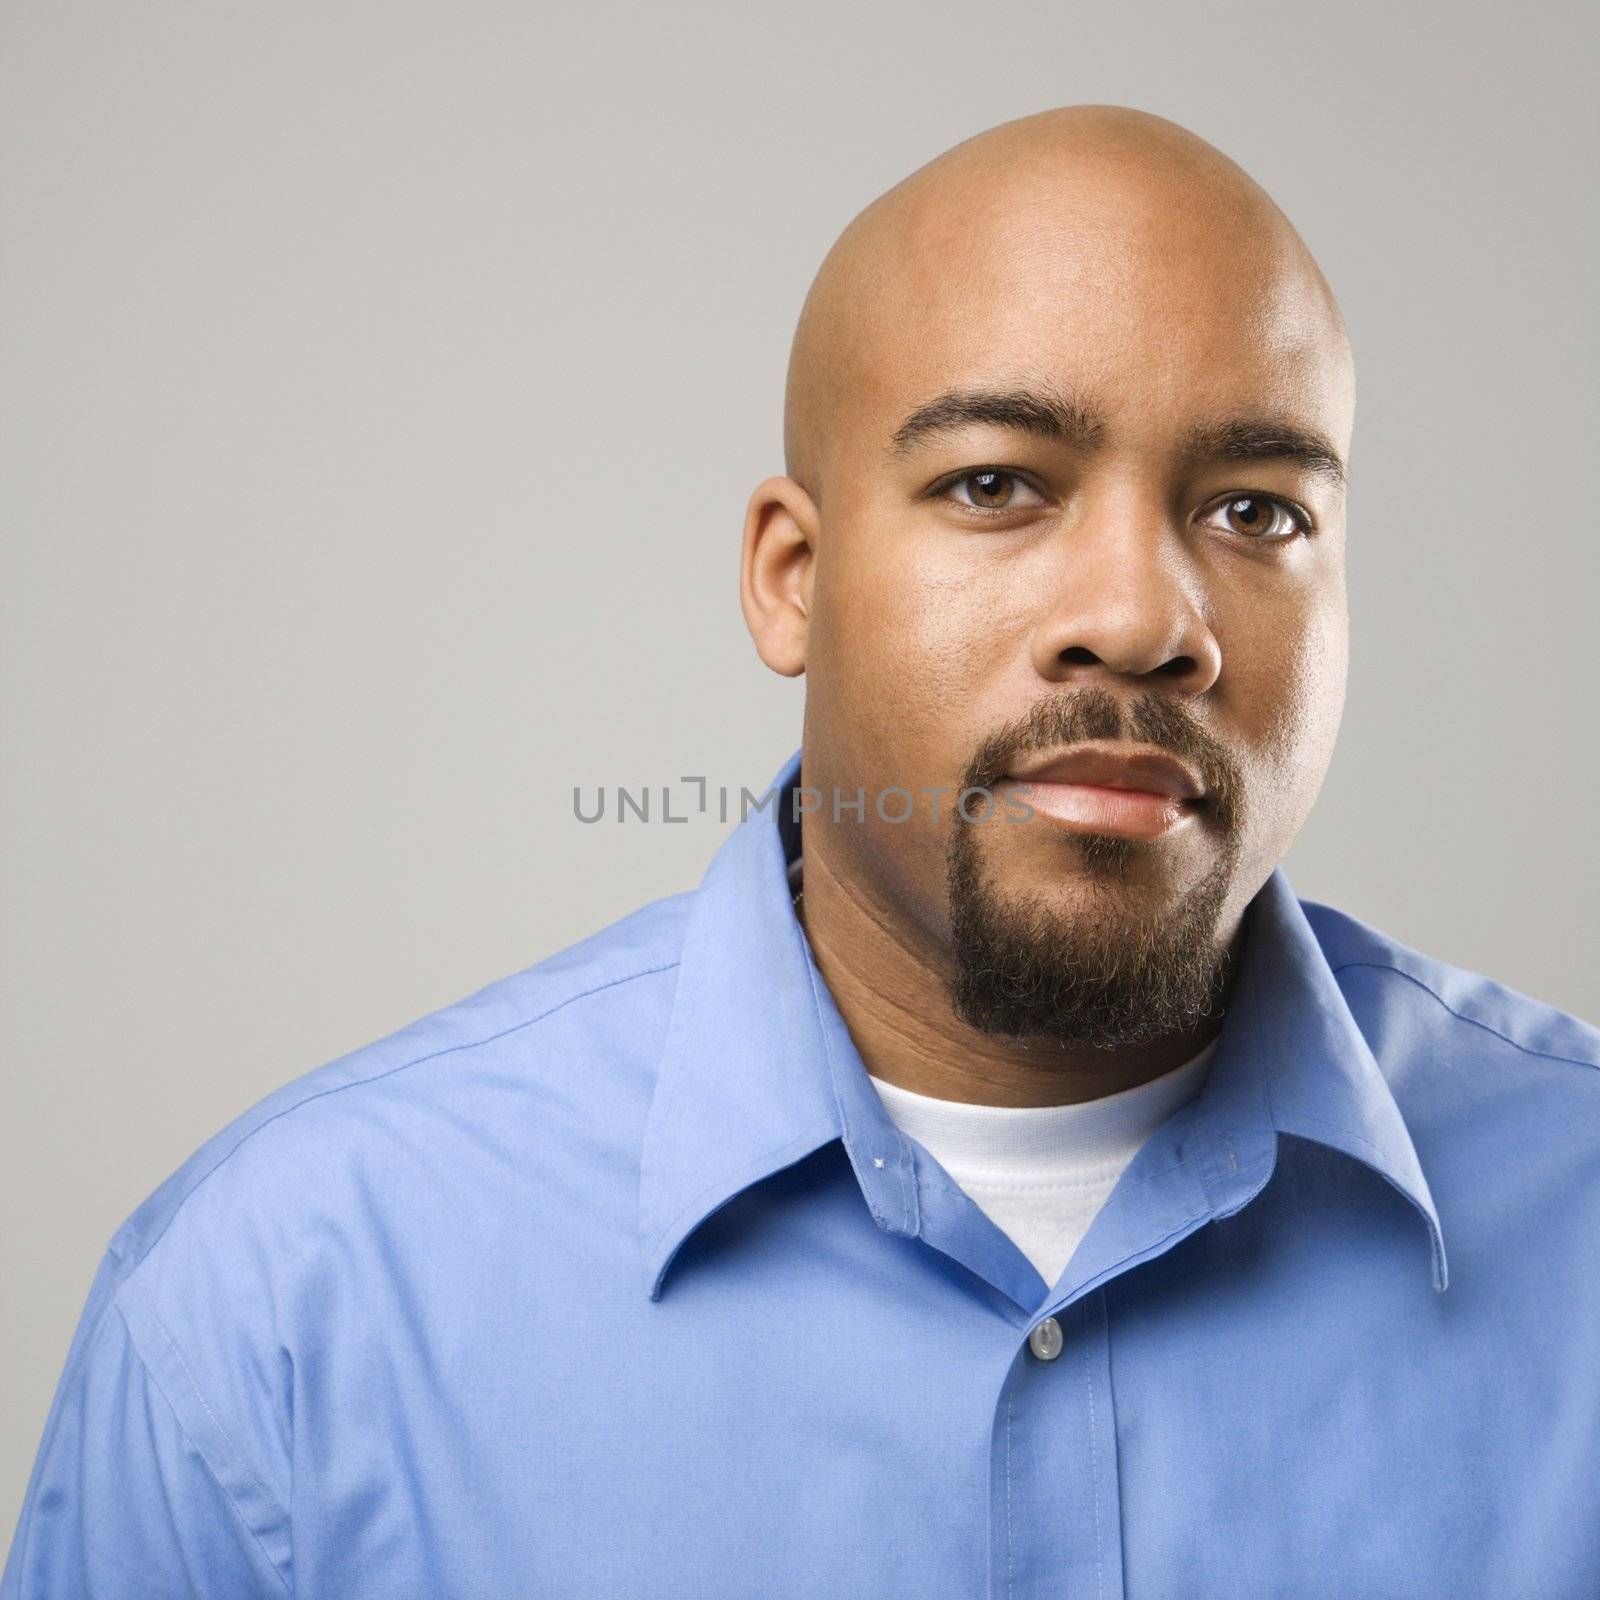 Portrait of African American man against gray background.